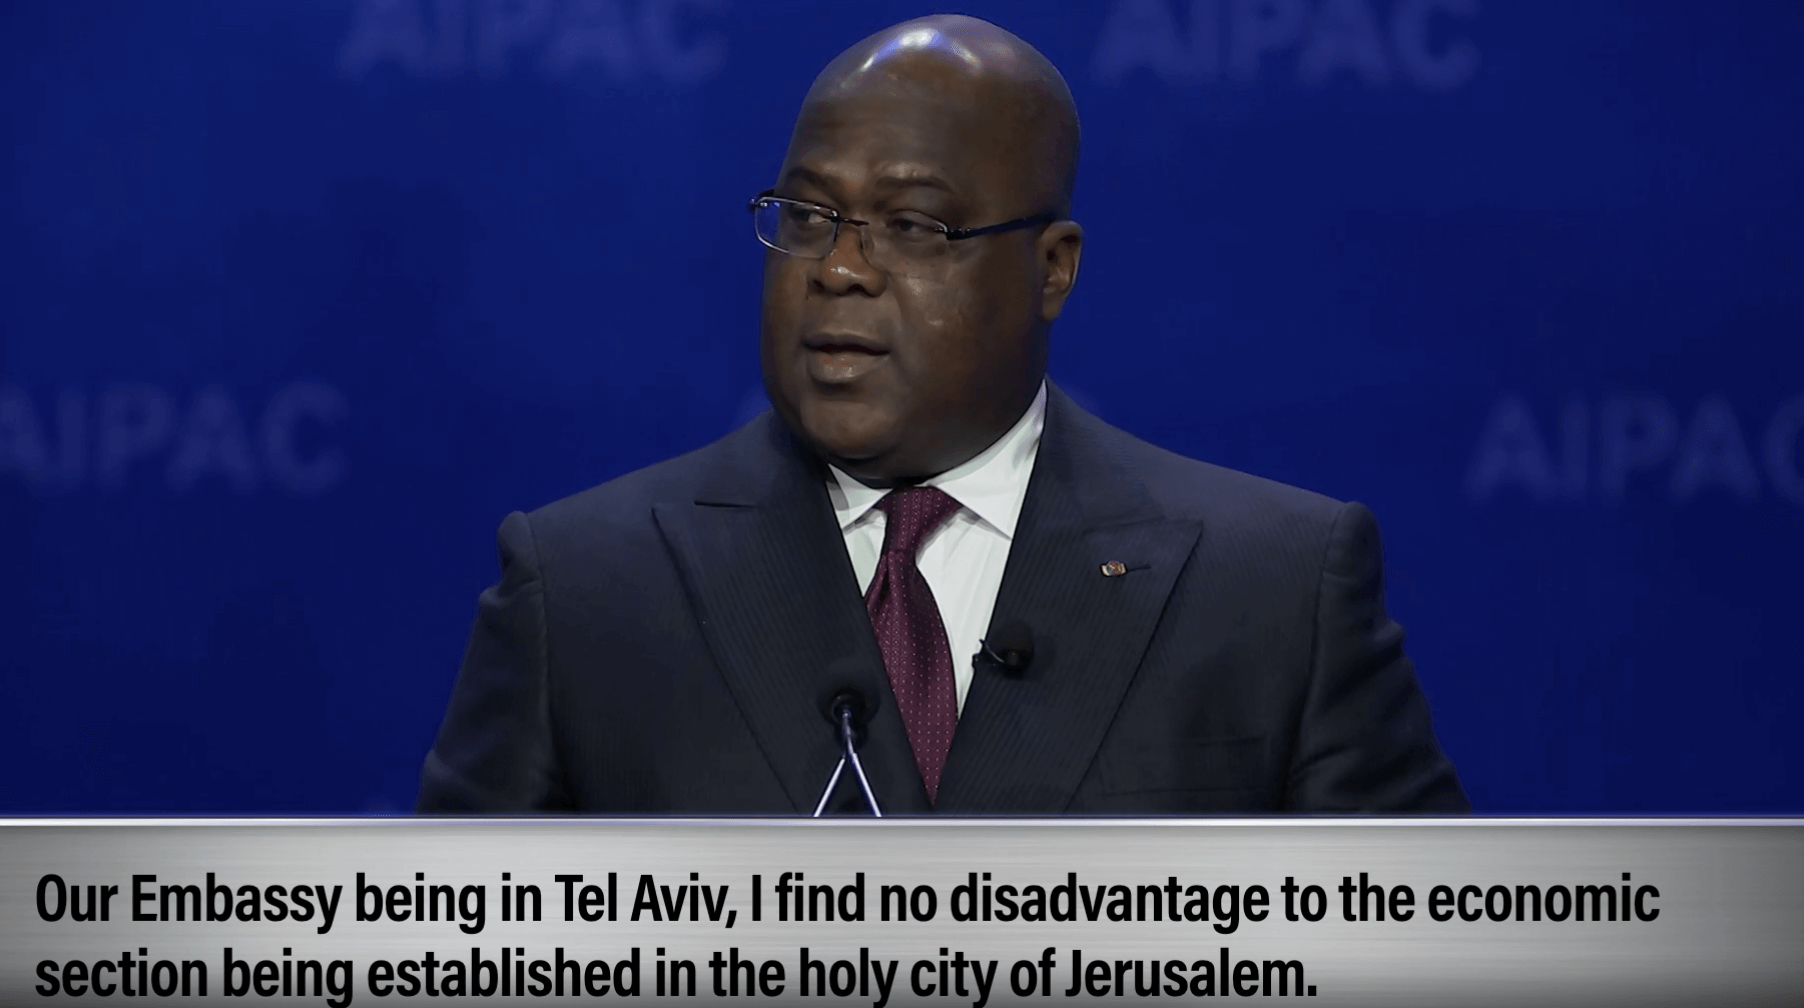 Felix Tshisekedi, president of the Democratic Republic of Congo, addresses the AIPAC Israel lobby conference on March 1, 2020. Screenshot of AIPAC video.